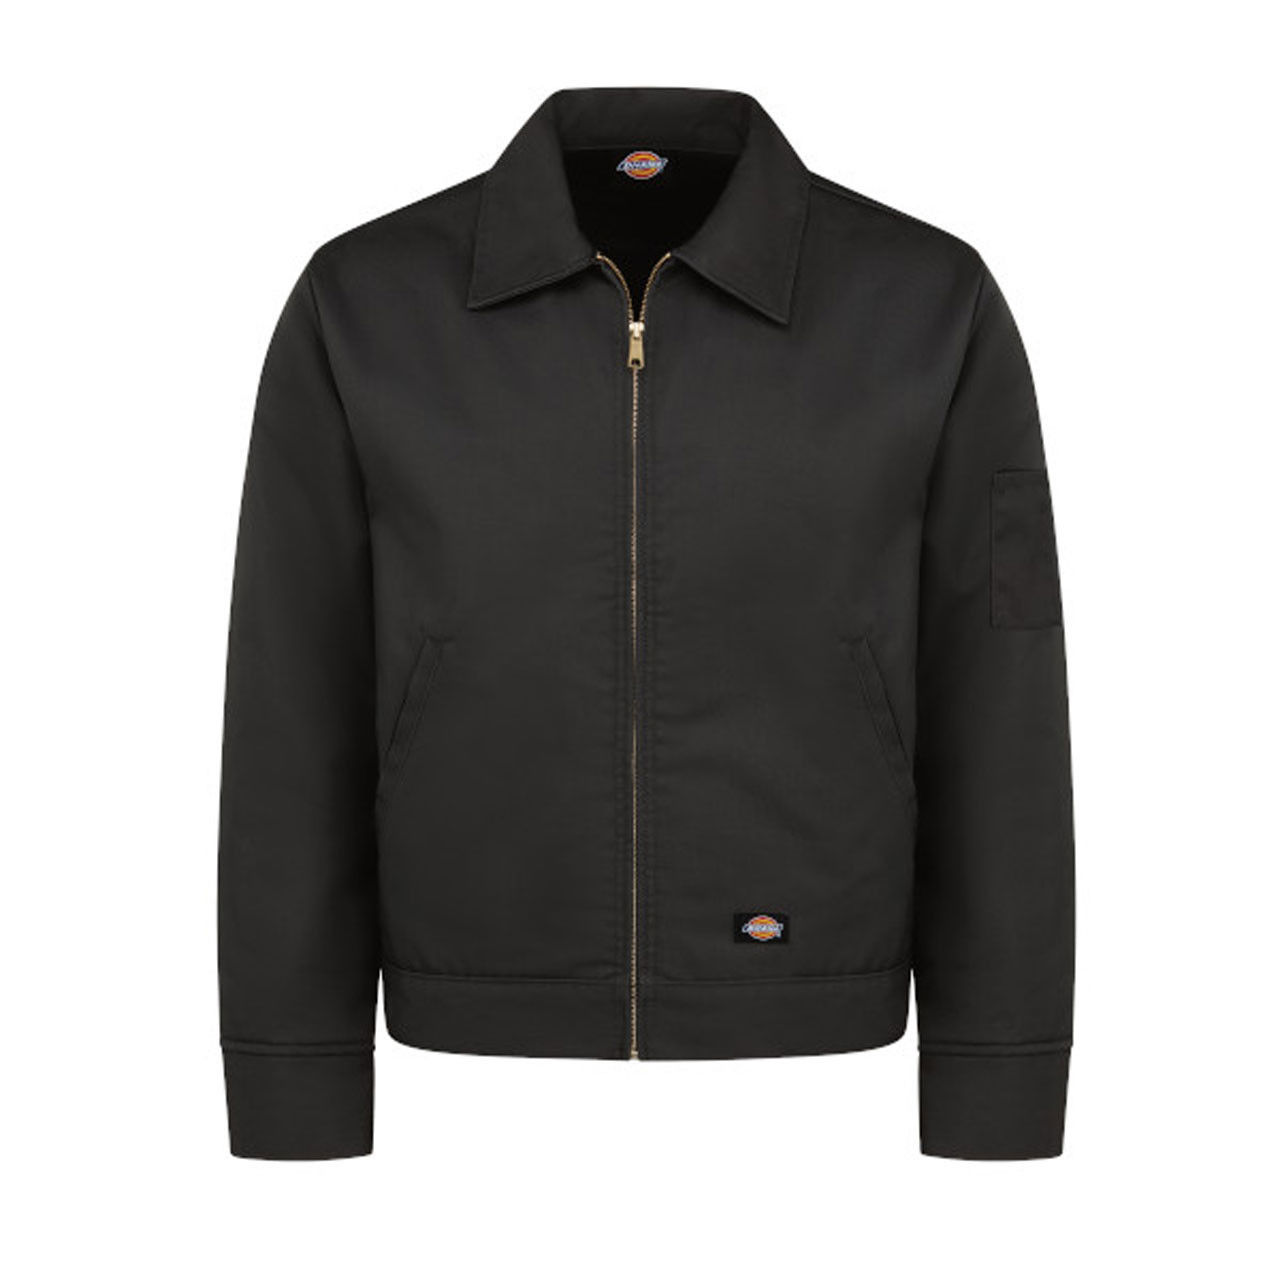 What material is the shell of this black Dickies jacket made of?